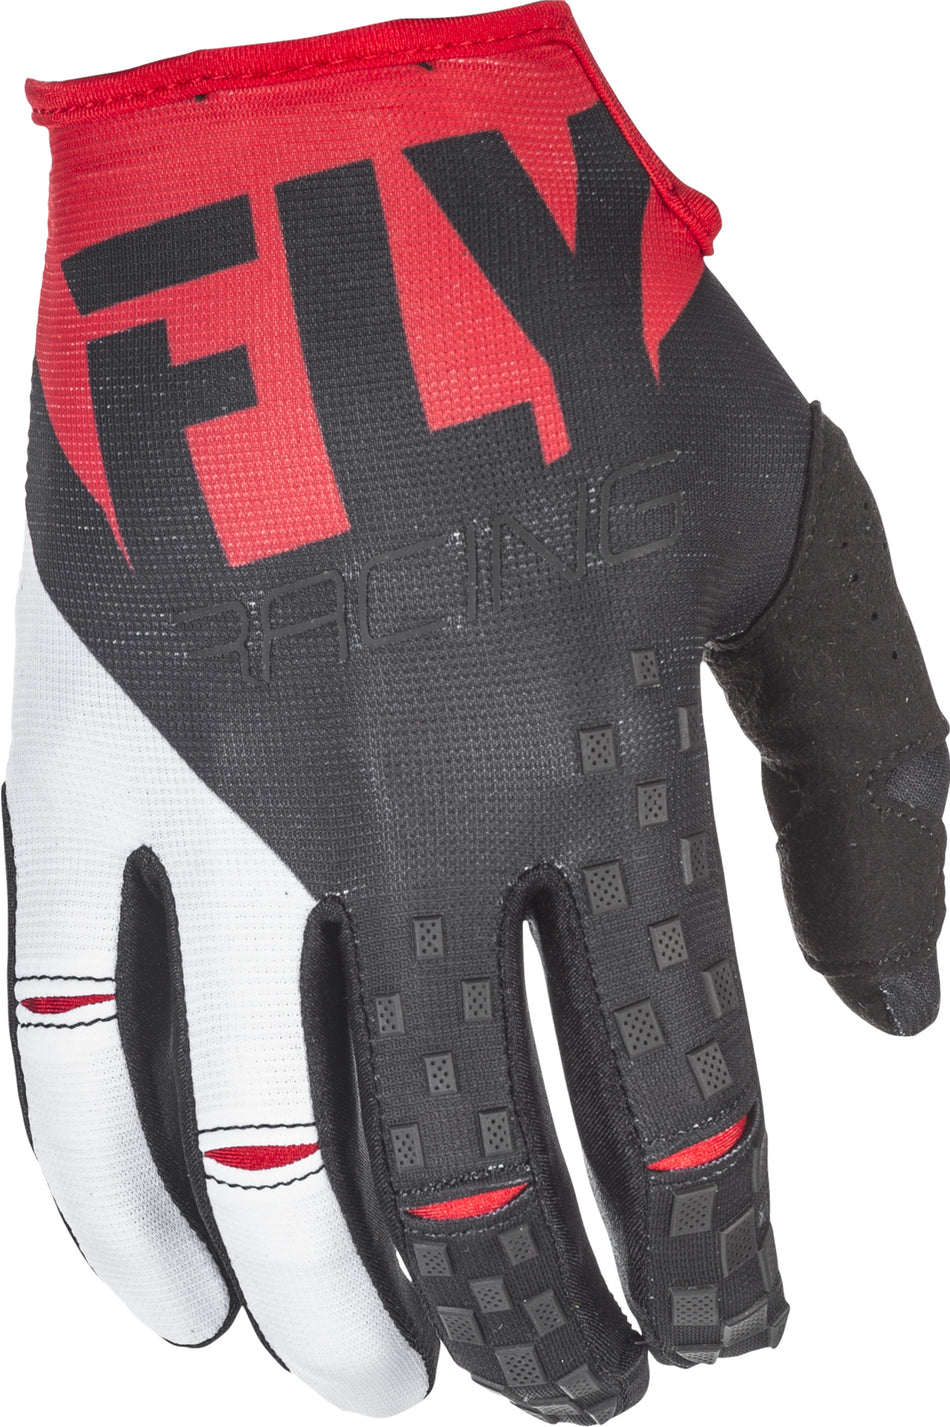 FLY RACING Kinetic Gloves Red/Black Sz 7 371-41207